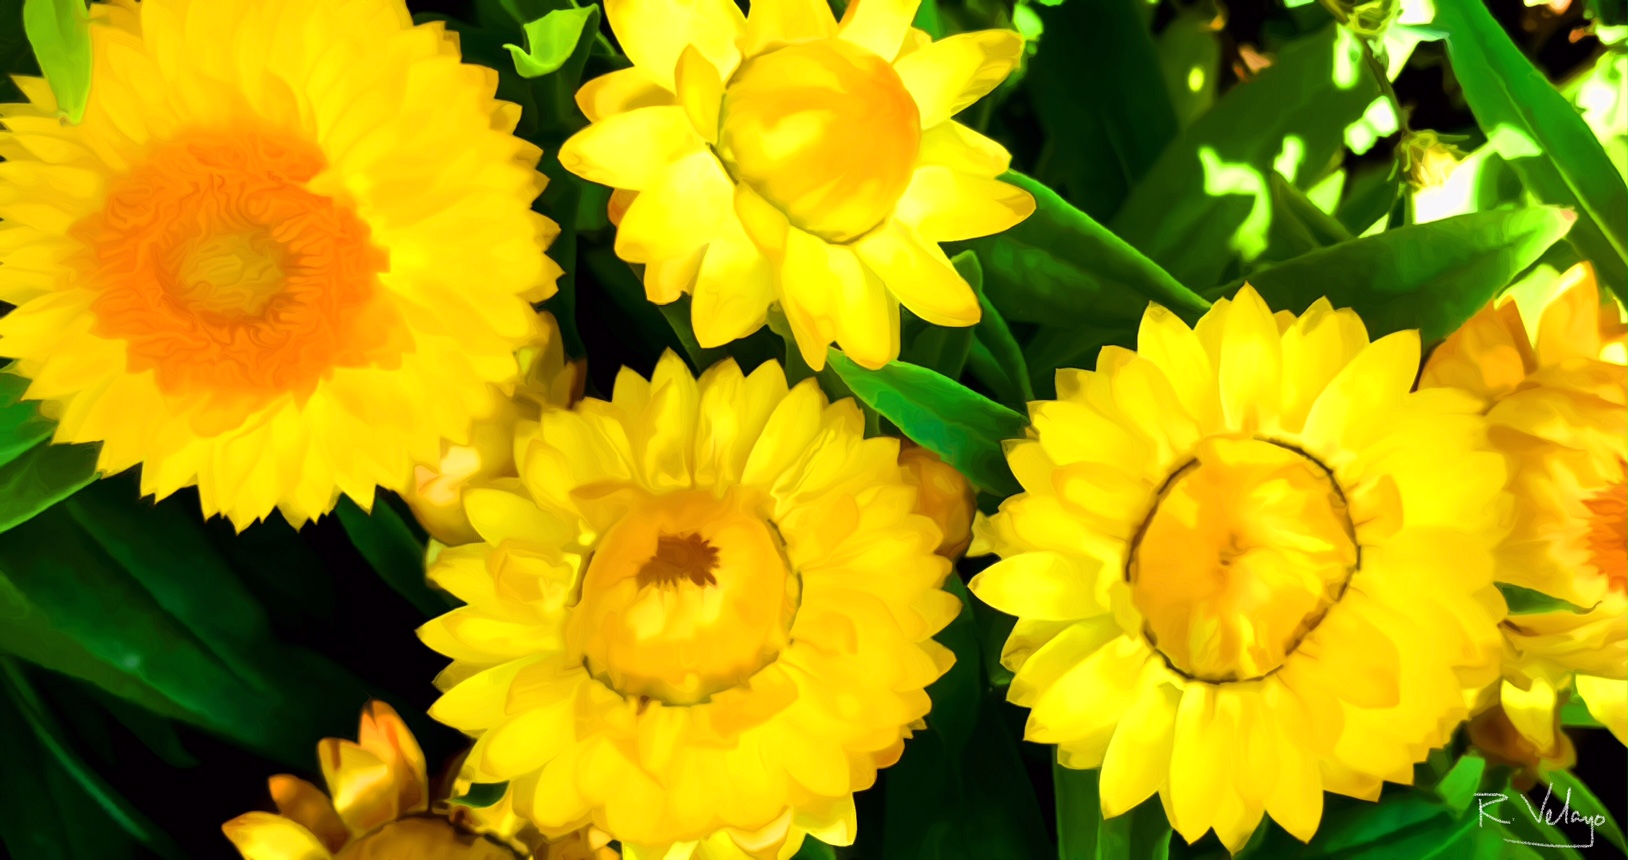 "LOVELY YELLOW FLOWERS" [Created: 3/13/2022]